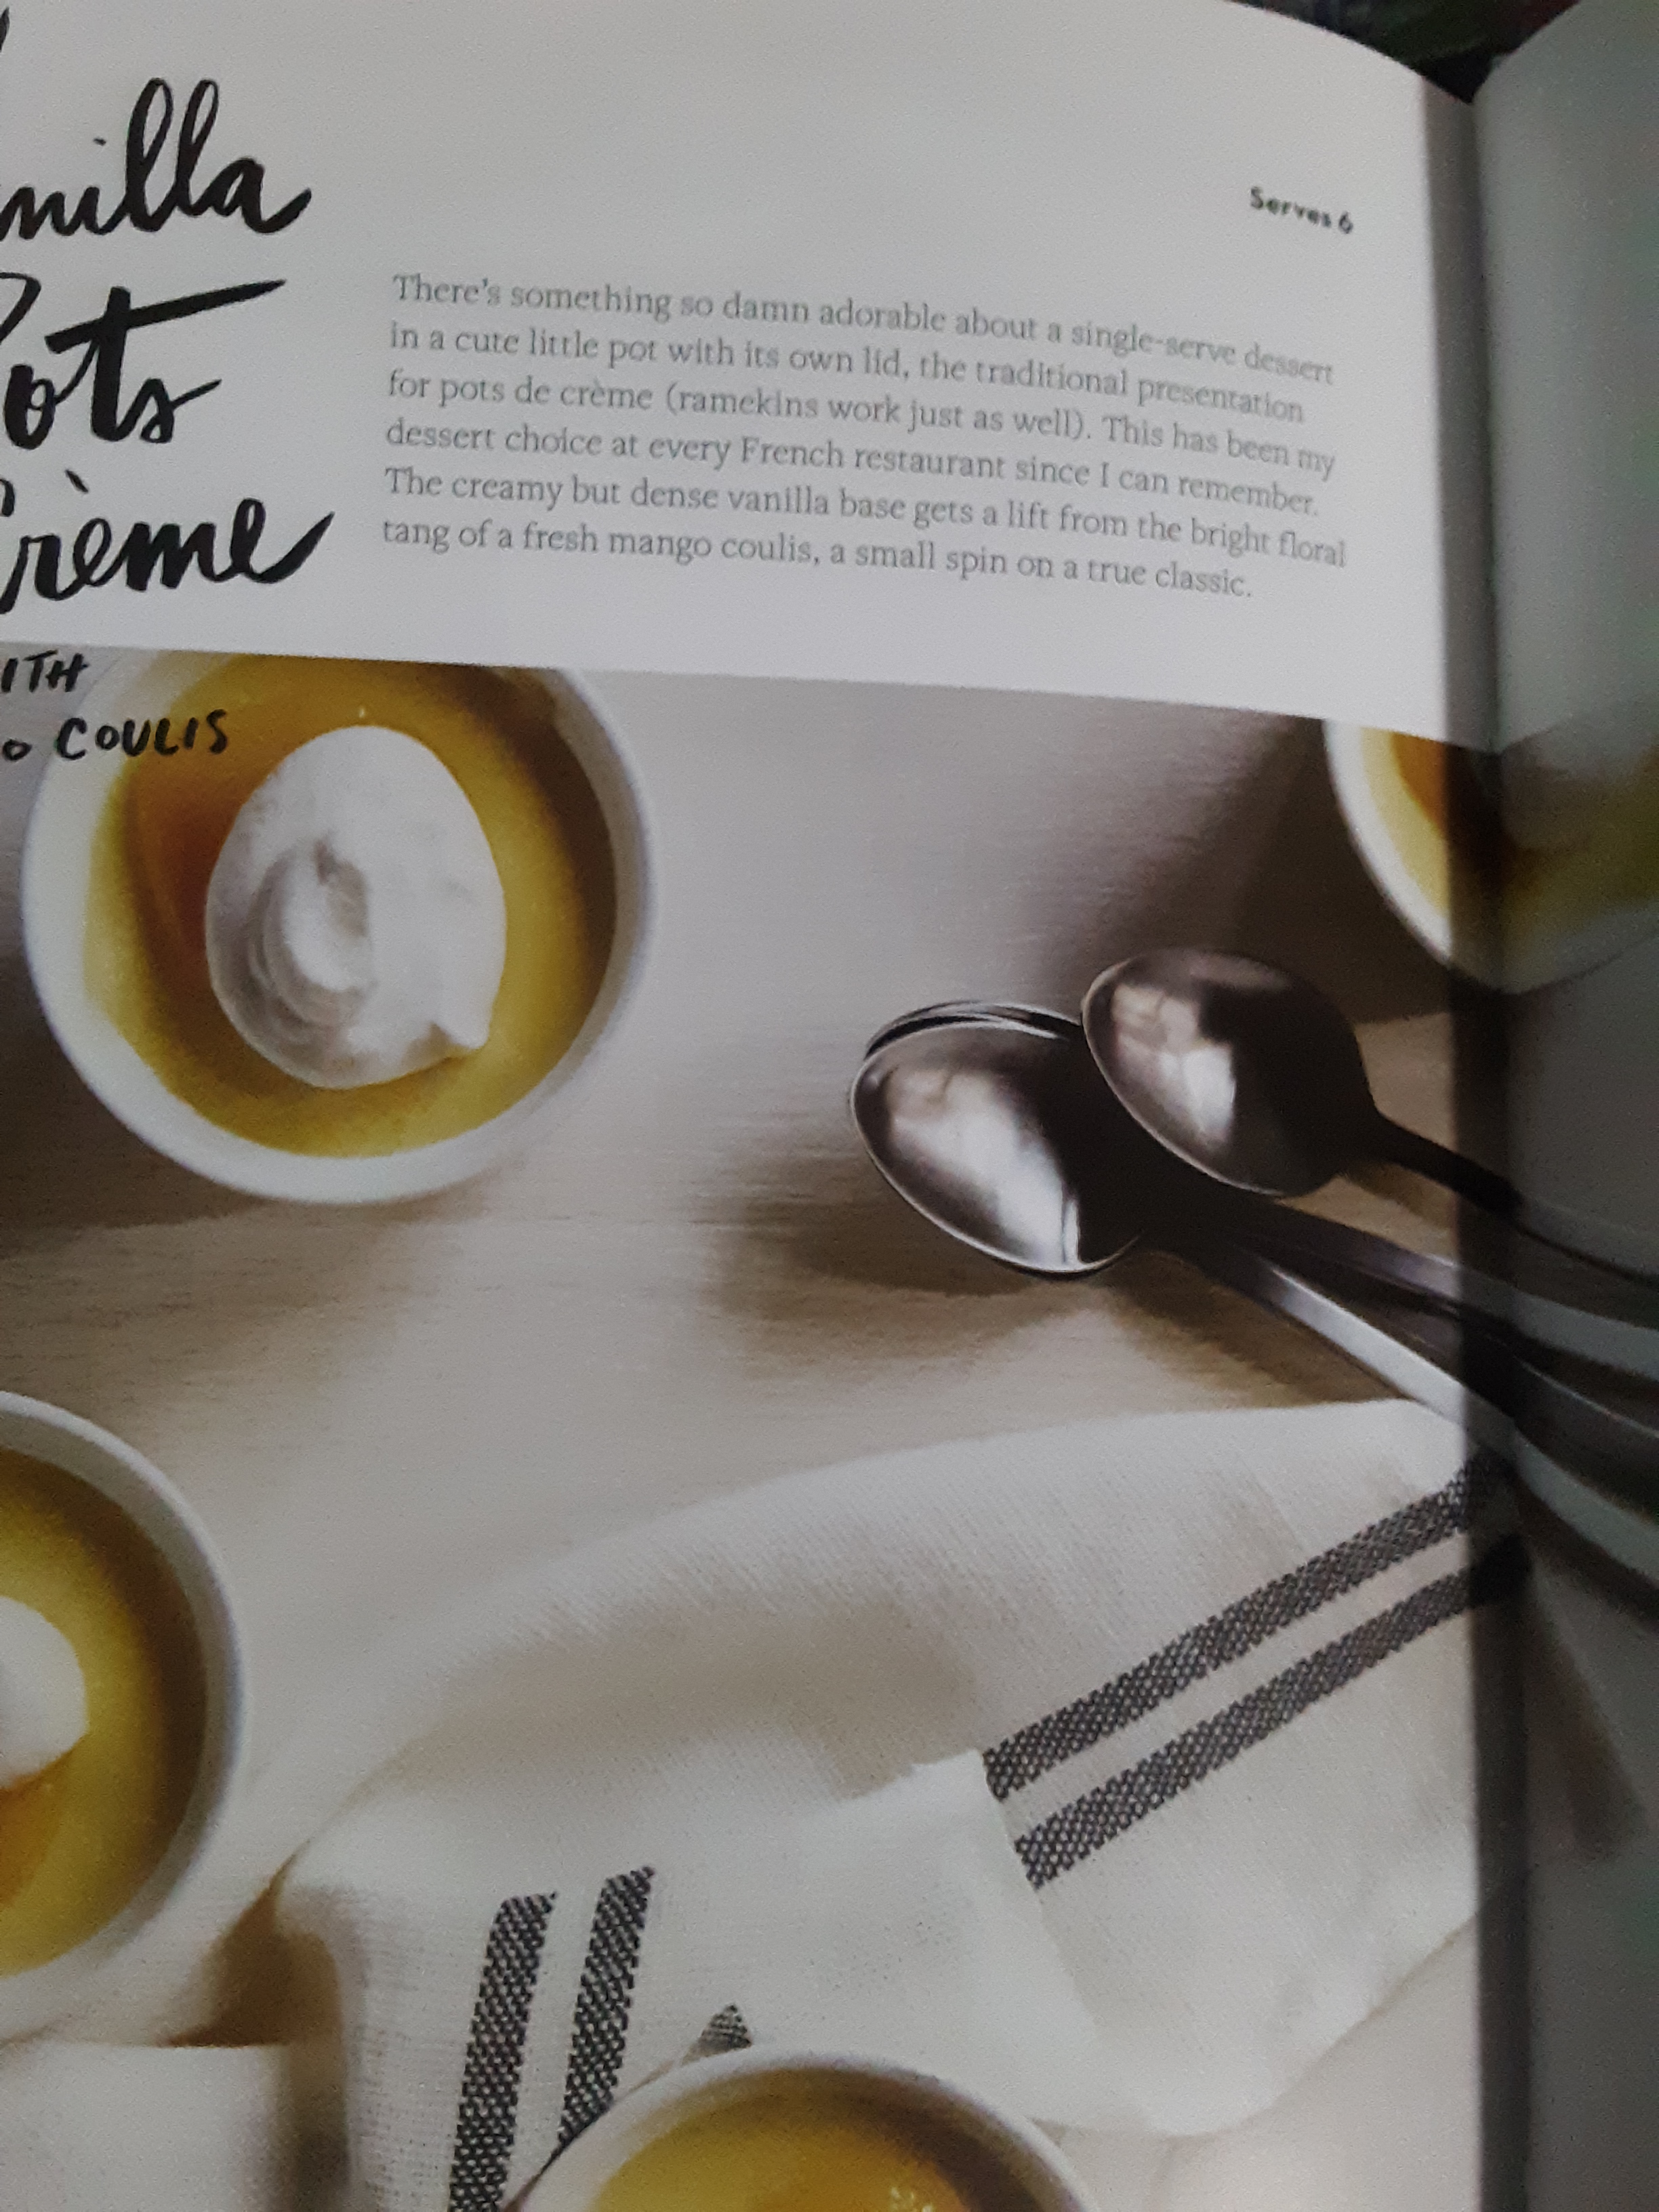 Living well in the 21st century - Limassol, Cyprus - Picture of the first page of the vanilla pots creme with mango coulis recipe. It says, "there's something so damn adorable about a single-serve dessert in a cute little pot with its own lid, the traditional presentation for pots de creme (ramekins work just as well). This has been my dessert choice at every french restaurant since I can remember. The creamy but dense vanilla base gets a lift from the bright  floral tang of a fresh mango coulis, a small spin on a true classic. 
Under the writing,there is a picture of the ramekins with a scoop of whipped white cream with several spoons. 